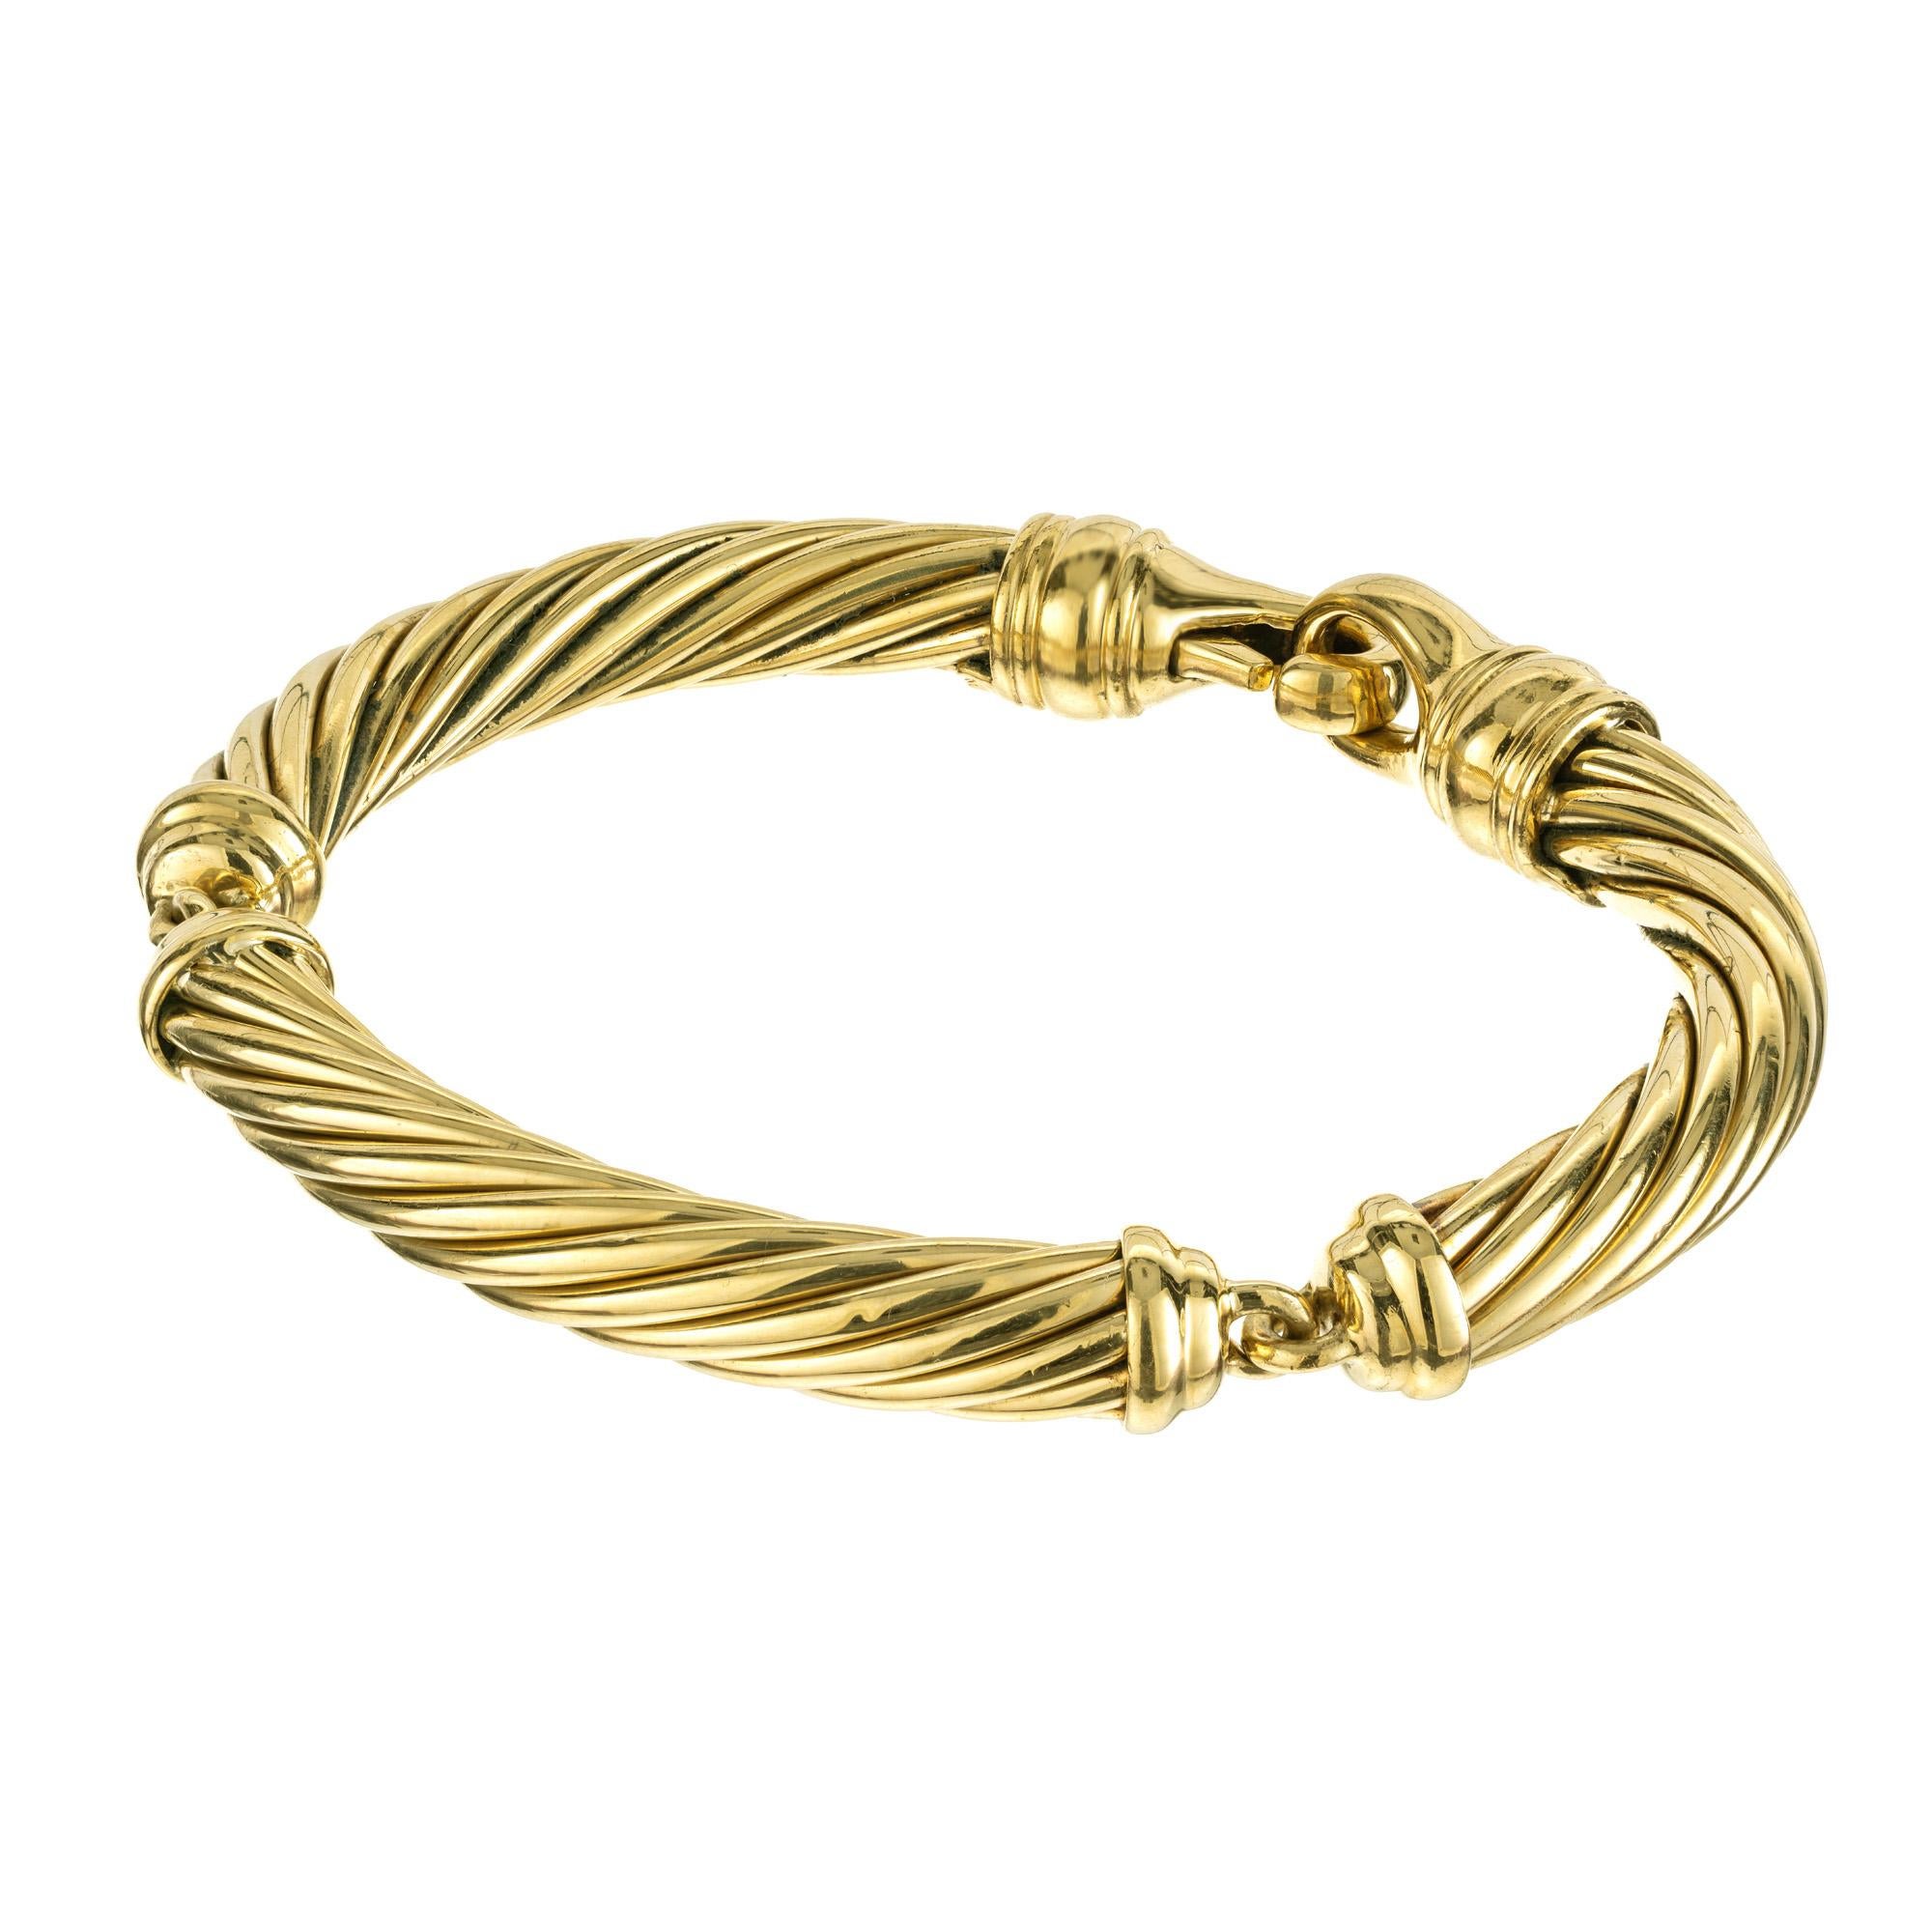 David Yurman signature cable design 18k yellow gold link bracelet. This retired style consists of 7mm wide twisted cable in three sections. David Yurman first created his iconic cable bracelet in 1982. A twisted helix adorned sometimes adorned with